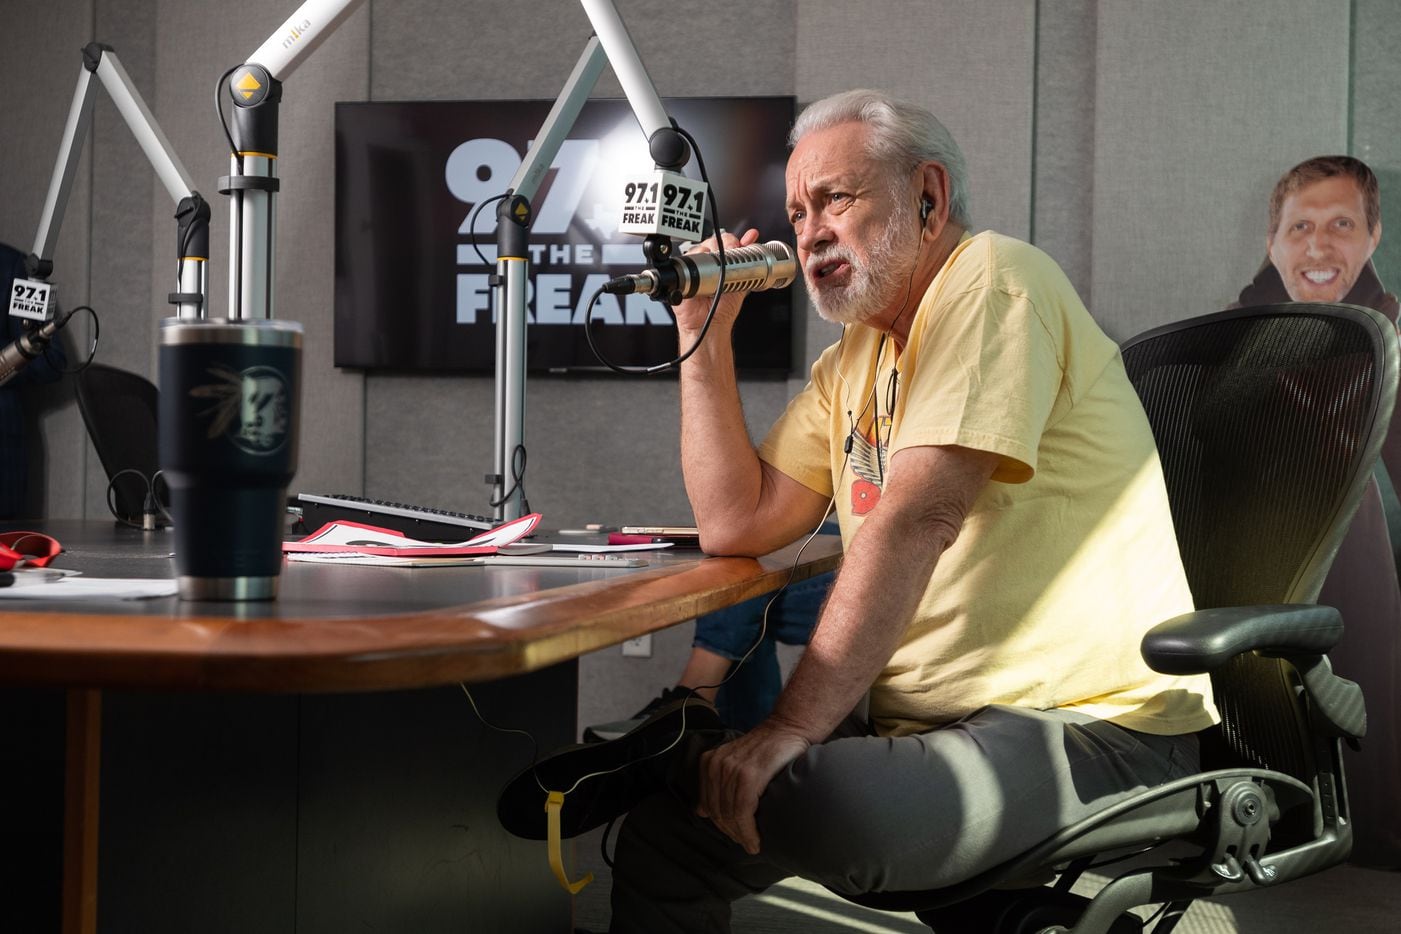 Radio legend Mike Rhyner talks on the air on The Downbeat, on the debut of Dallas radio...